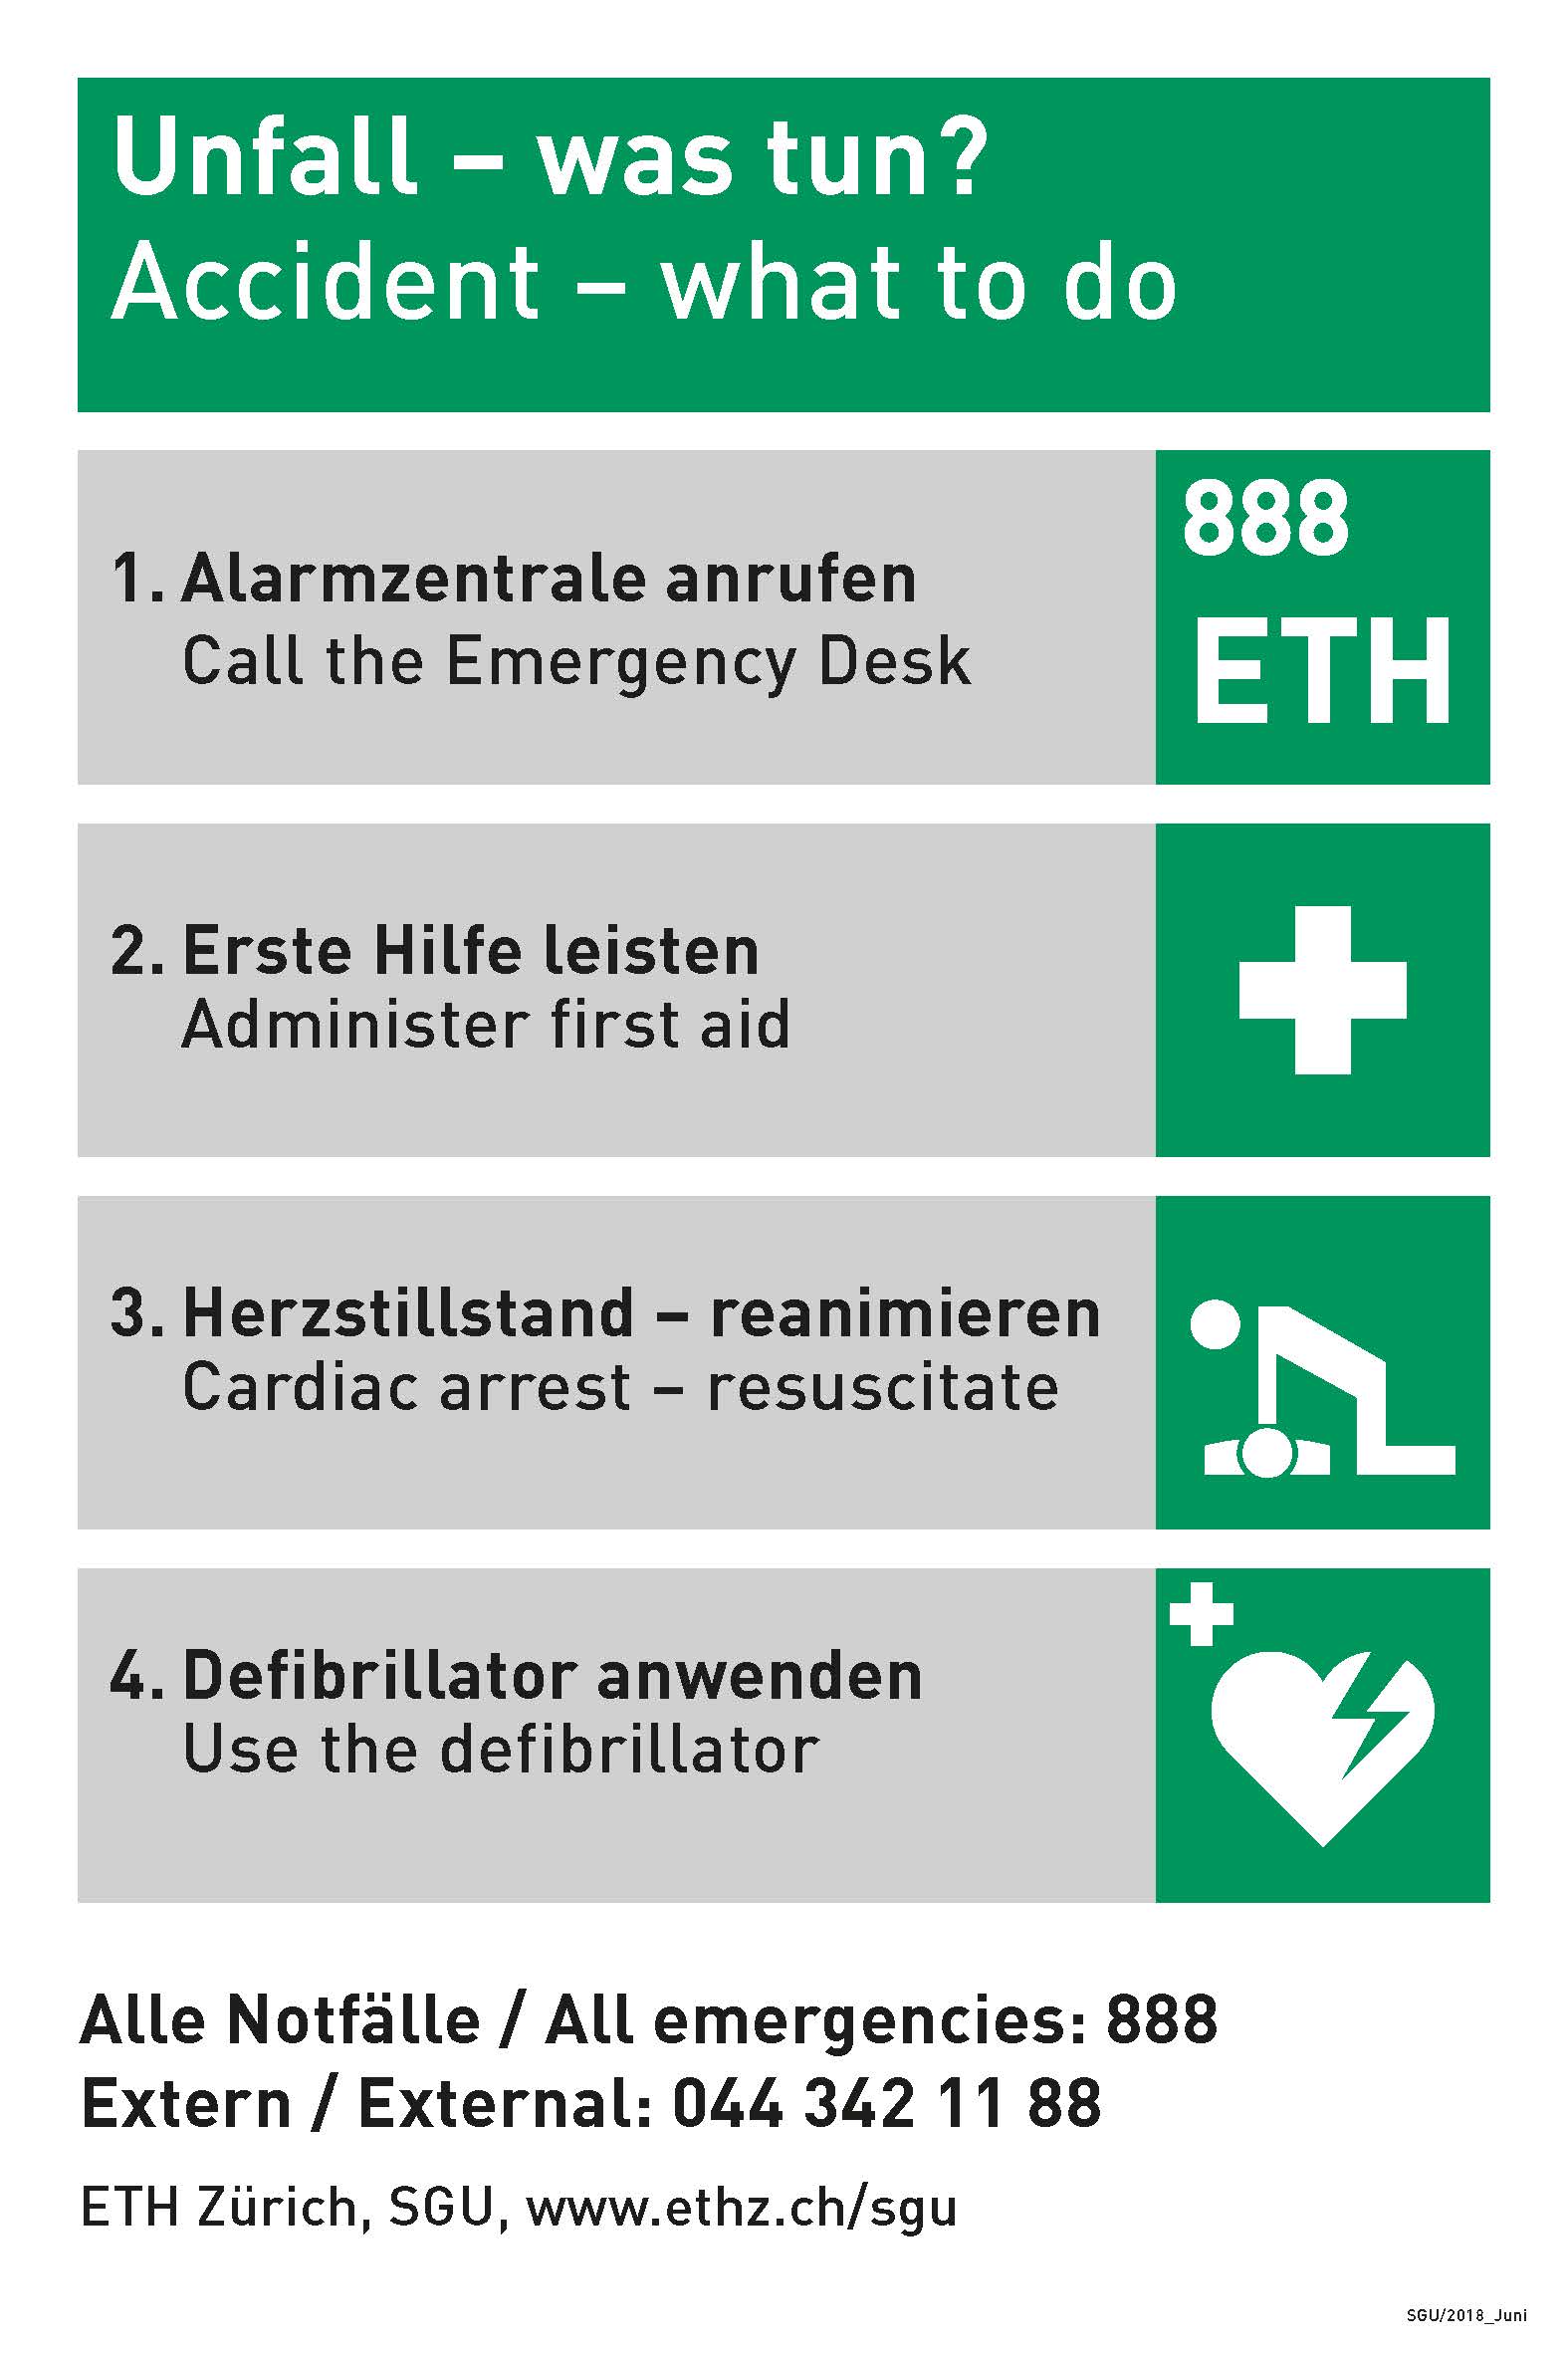 Enlarged view: Accident - what to do? 1. Call 888 2. Administer dirst Aid 3. Cardiac arrest - resuscitate 4. Use defibrillator